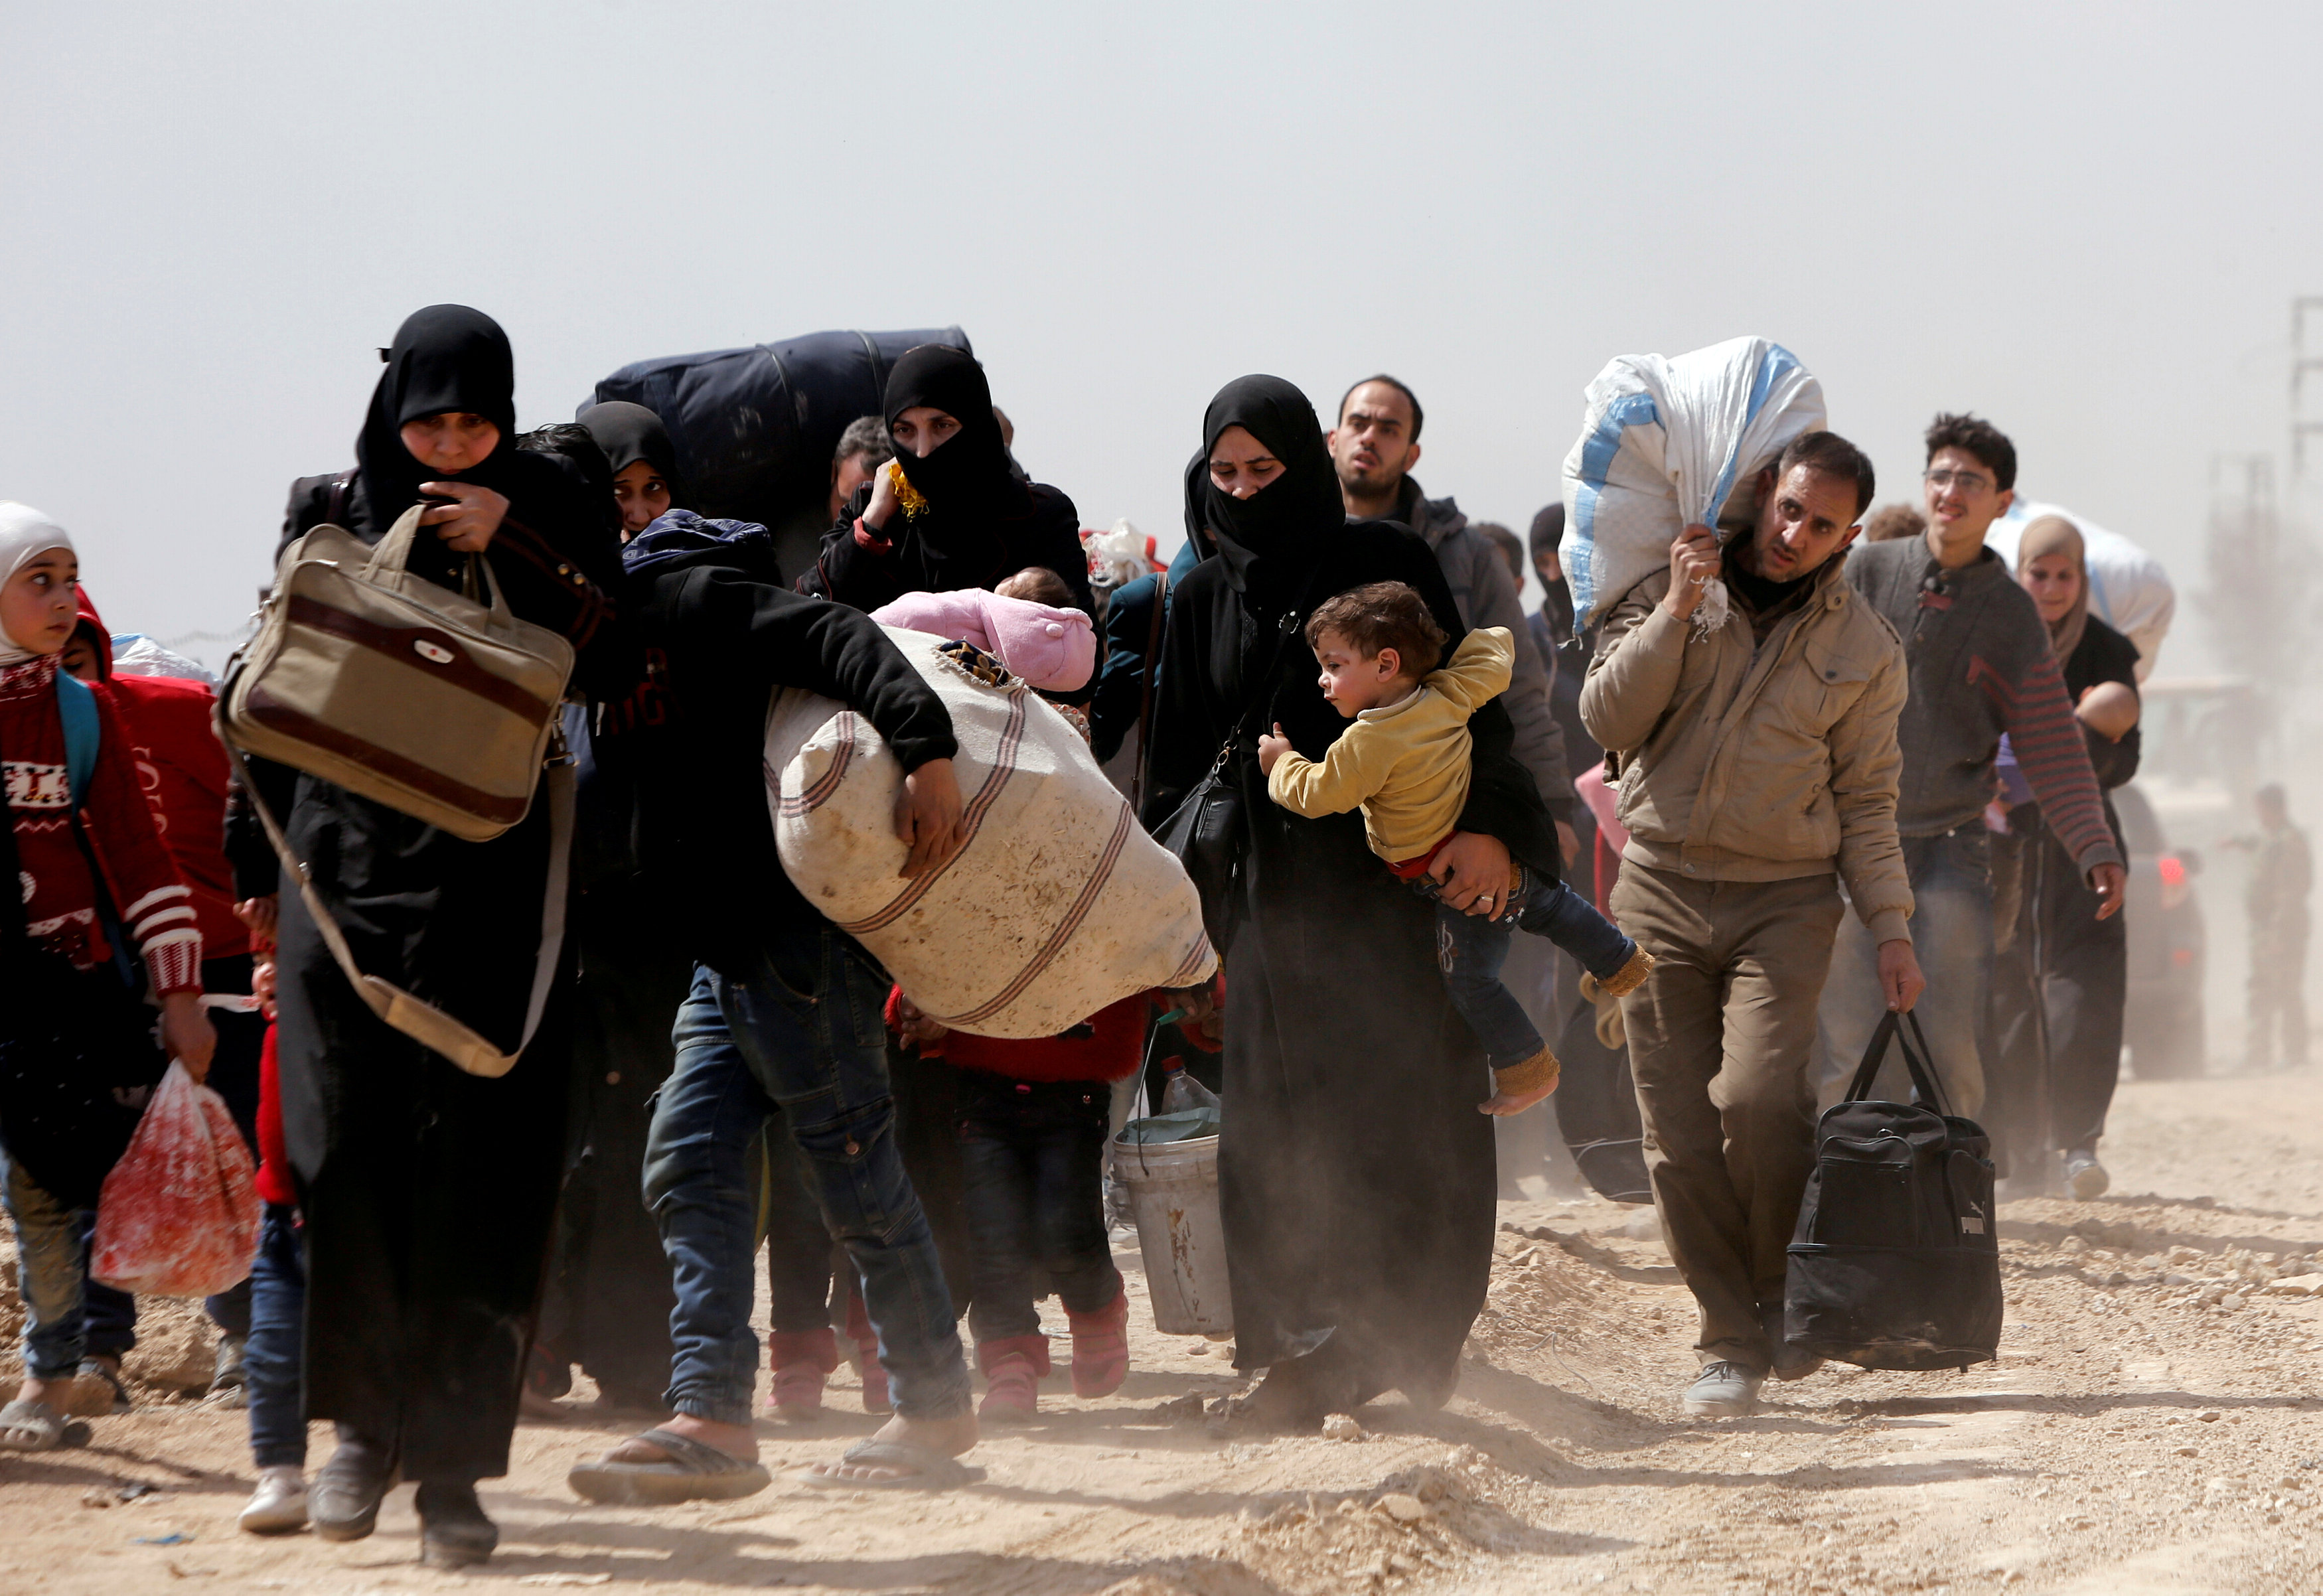 Thousands more flee homes as battles rage in Syria